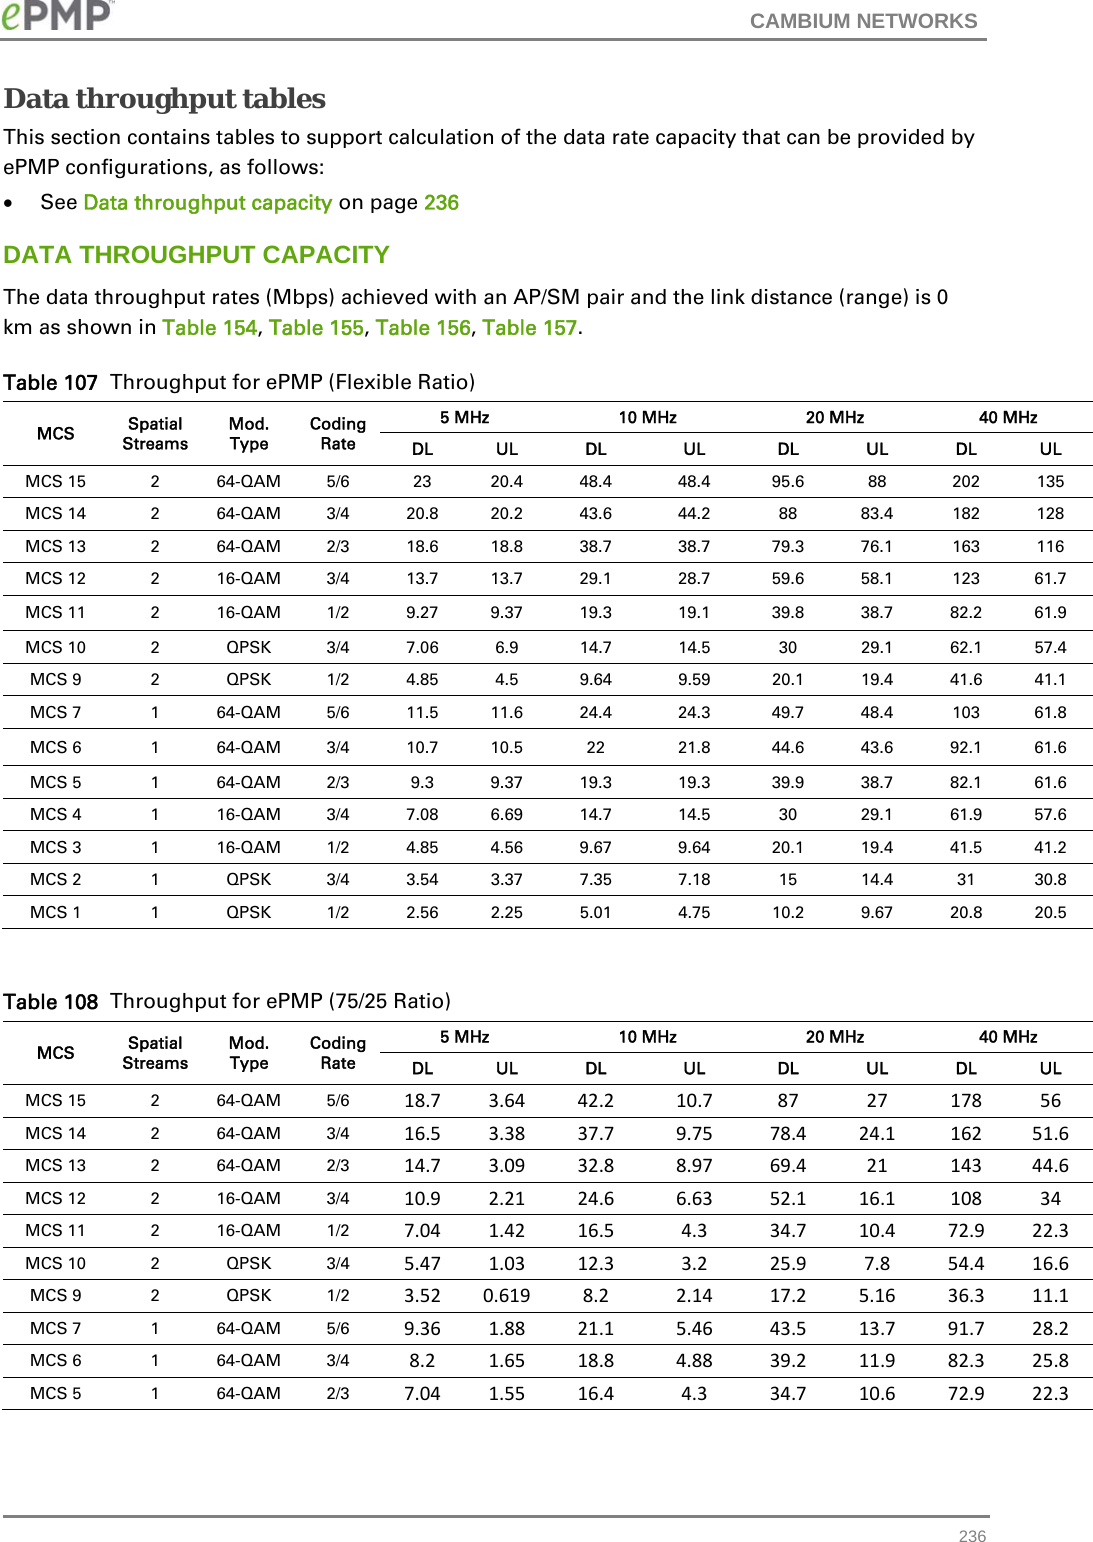 CAMBIUM NETWORKS   236Data throughput tables This section contains tables to support calculation of the data rate capacity that can be provided by ePMP configurations, as follows:  See Data throughput capacity on page 236 DATA THROUGHPUT CAPACITY The data throughput rates (Mbps) achieved with an AP/SM pair and the link distance (range) is 0 km as shown in Table 154, Table 155, Table 156, Table 157. Table 107  Throughput for ePMP (Flexible Ratio) MCS  Spatial Streams Mod. Type Coding Rate 5 MHz  10 MHz  20 MHz  40 MHz DL UL DL  UL  DL UL DL UL MCS 15  2 64-QAM 5/6  23  20.4 48.4  48.4  95.6  88  202 135 MCS 14  2 64-QAM 3/4 20.8 20.2 43.6  44.2  88  83.4  182 128 MCS 13  2 64-QAM 2/3 18.6 18.8 38.7  38.7  79.3 76.1  163 116 MCS 12  2 16-QAM 3/4 13.7 13.7 29.1  28.7  59.6 58.1  123 61.7 MCS 11  2 16-QAM 1/2 9.27 9.37 19.3  19.1  39.8 38.7 82.2 61.9 MCS 10  2  QPSK 3/4 7.06 6.9  14.7  14.5  30  29.1 62.1 57.4 MCS 9  2  QPSK 1/2 4.85 4.5  9.64  9.59  20.1 19.4 41.6 41.1 MCS 7  1 64-QAM 5/6 11.5 11.6 24.4  24.3  49.7 48.4  103 61.8 MCS 6  1 64-QAM 3/4 10.7 10.5  22  21.8  44.6 43.6 92.1 61.6 MCS 5  1 64-QAM 2/3  9.3 9.37 19.3  19.3  39.9 38.7 82.1 61.6 MCS 4  1 16-QAM 3/4 7.08 6.69 14.7  14.5  30  29.1 61.9 57.6 MCS 3  1 16-QAM 1/2 4.85 4.56 9.67  9.64  20.1 19.4 41.5 41.2 MCS 2  1  QPSK 3/4 3.54 3.37 7.35  7.18  15  14.4  31  30.8 MCS 1  1  QPSK 1/2 2.56 2.25 5.01  4.75  10.2 9.67 20.8 20.5  Table 108  Throughput for ePMP (75/25 Ratio) MCS  Spatial Streams Mod. Type Coding Rate 5 MHz  10 MHz  20 MHz  40 MHz DL UL DL  UL  DL UL DL UL MCS 15  2  64-QAM  5/6  18.7 3.64 42.2 10.7 87 27 178 56 MCS 14  2  64-QAM  3/4  16.5 3.38 37.7 9.75 78.4 24.1 162 51.6 MCS 13  2  64-QAM  2/3  14.7 3.09 32.8 8.97 69.4 21 143 44.6 MCS 12  2  16-QAM  3/4  10.9 2.21 24.6 6.63 52.1 16.1 108 34 MCS 11  2  16-QAM  1/2  7.04 1.42 16.5 4.3 34.7 10.4 72.9 22.3 MCS 10  2  QPSK  3/4  5.47 1.03 12.3 3.2 25.9 7.8 54.4 16.6 MCS 9  2  QPSK  1/2  3.52 0.619 8.2 2.14 17.2 5.16 36.3 11.1 MCS 7  1  64-QAM  5/6  9.36 1.88 21.1 5.46 43.5 13.7 91.7 28.2 MCS 6  1  64-QAM  3/4  8.2 1.65 18.8 4.88 39.2 11.9 82.3 25.8 MCS 5  1  64-QAM  2/3  7.04 1.55 16.4 4.3 34.7 10.6 72.9 22.3 